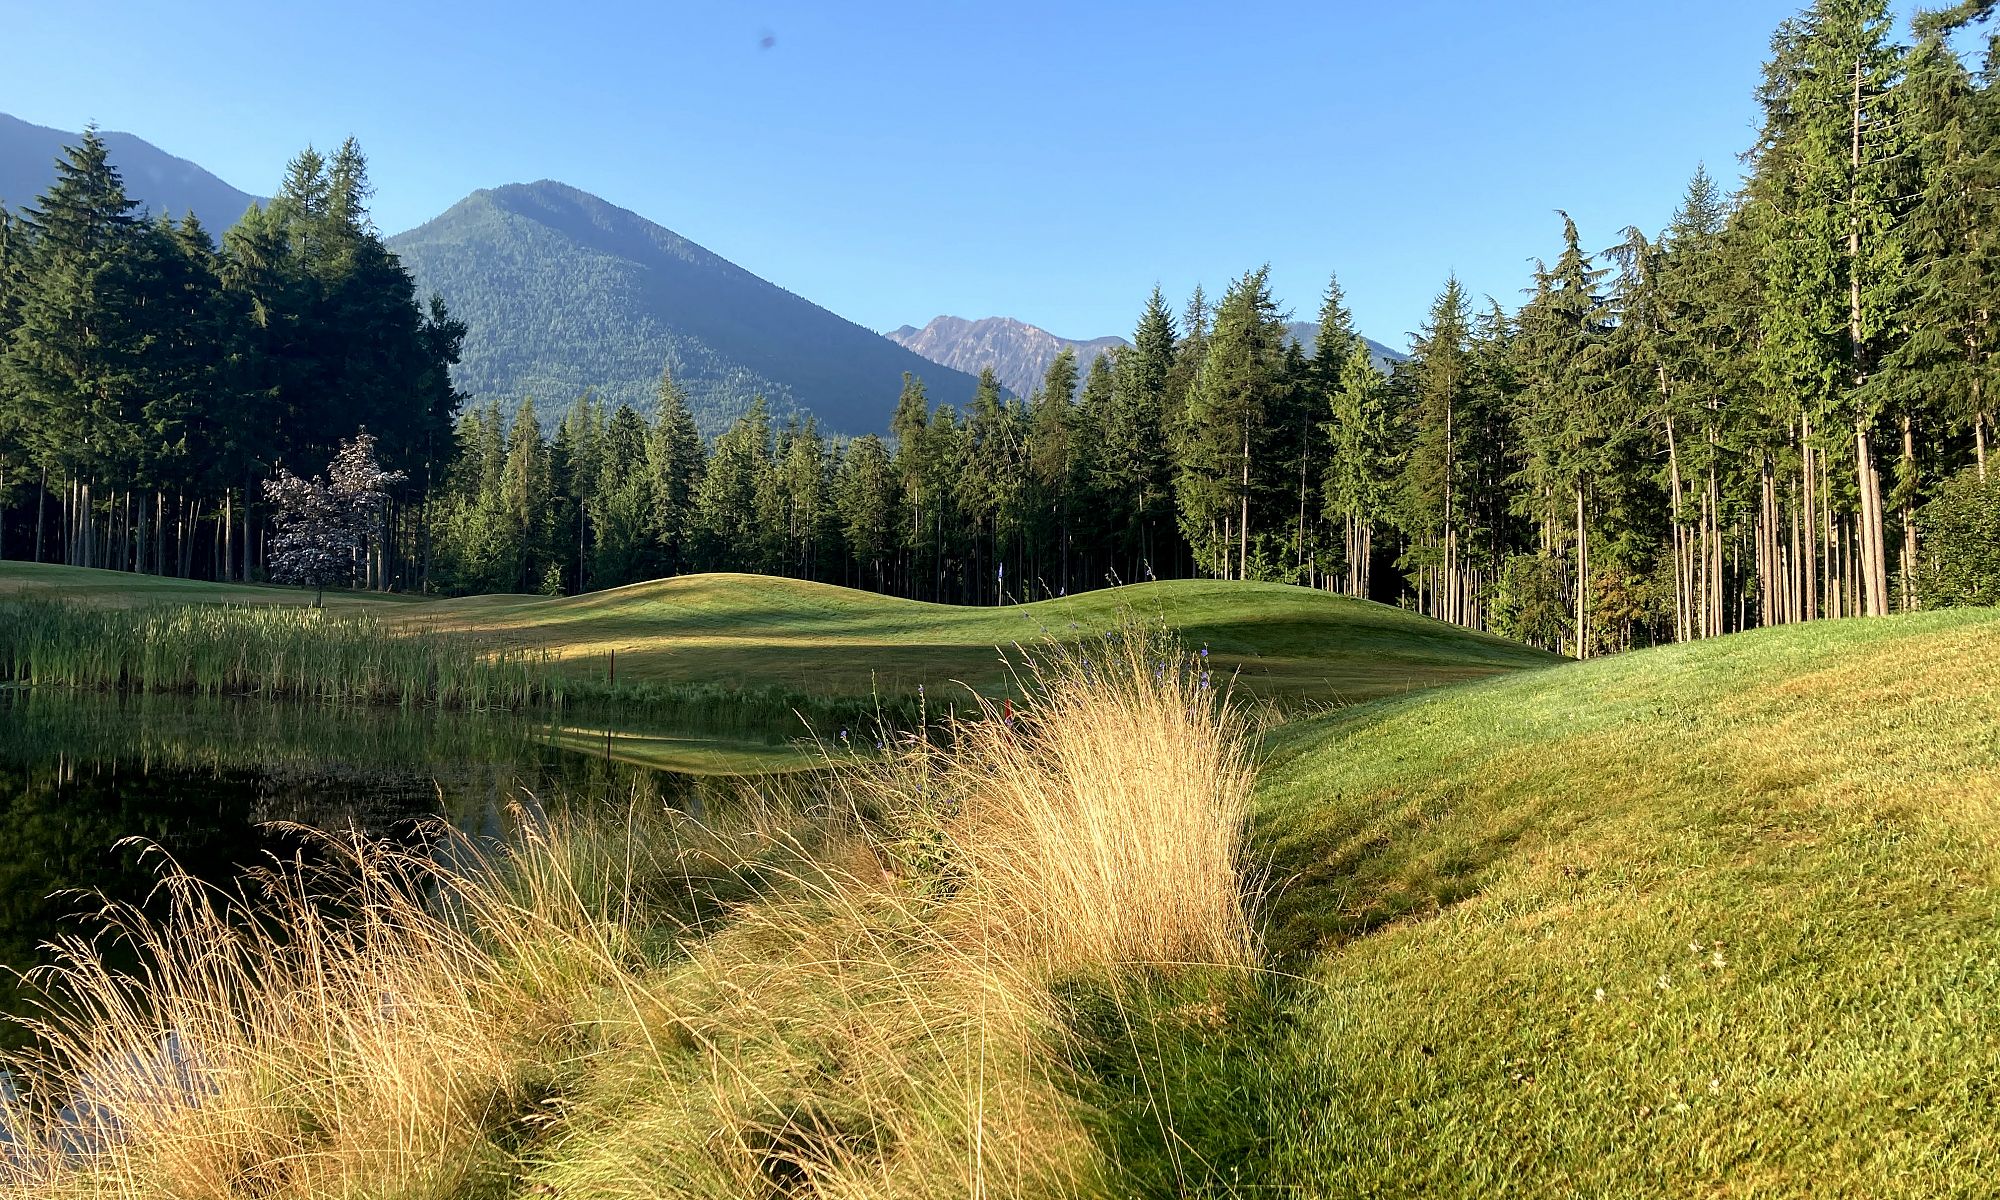 The First Choice for Golf in the West Kootenay Region